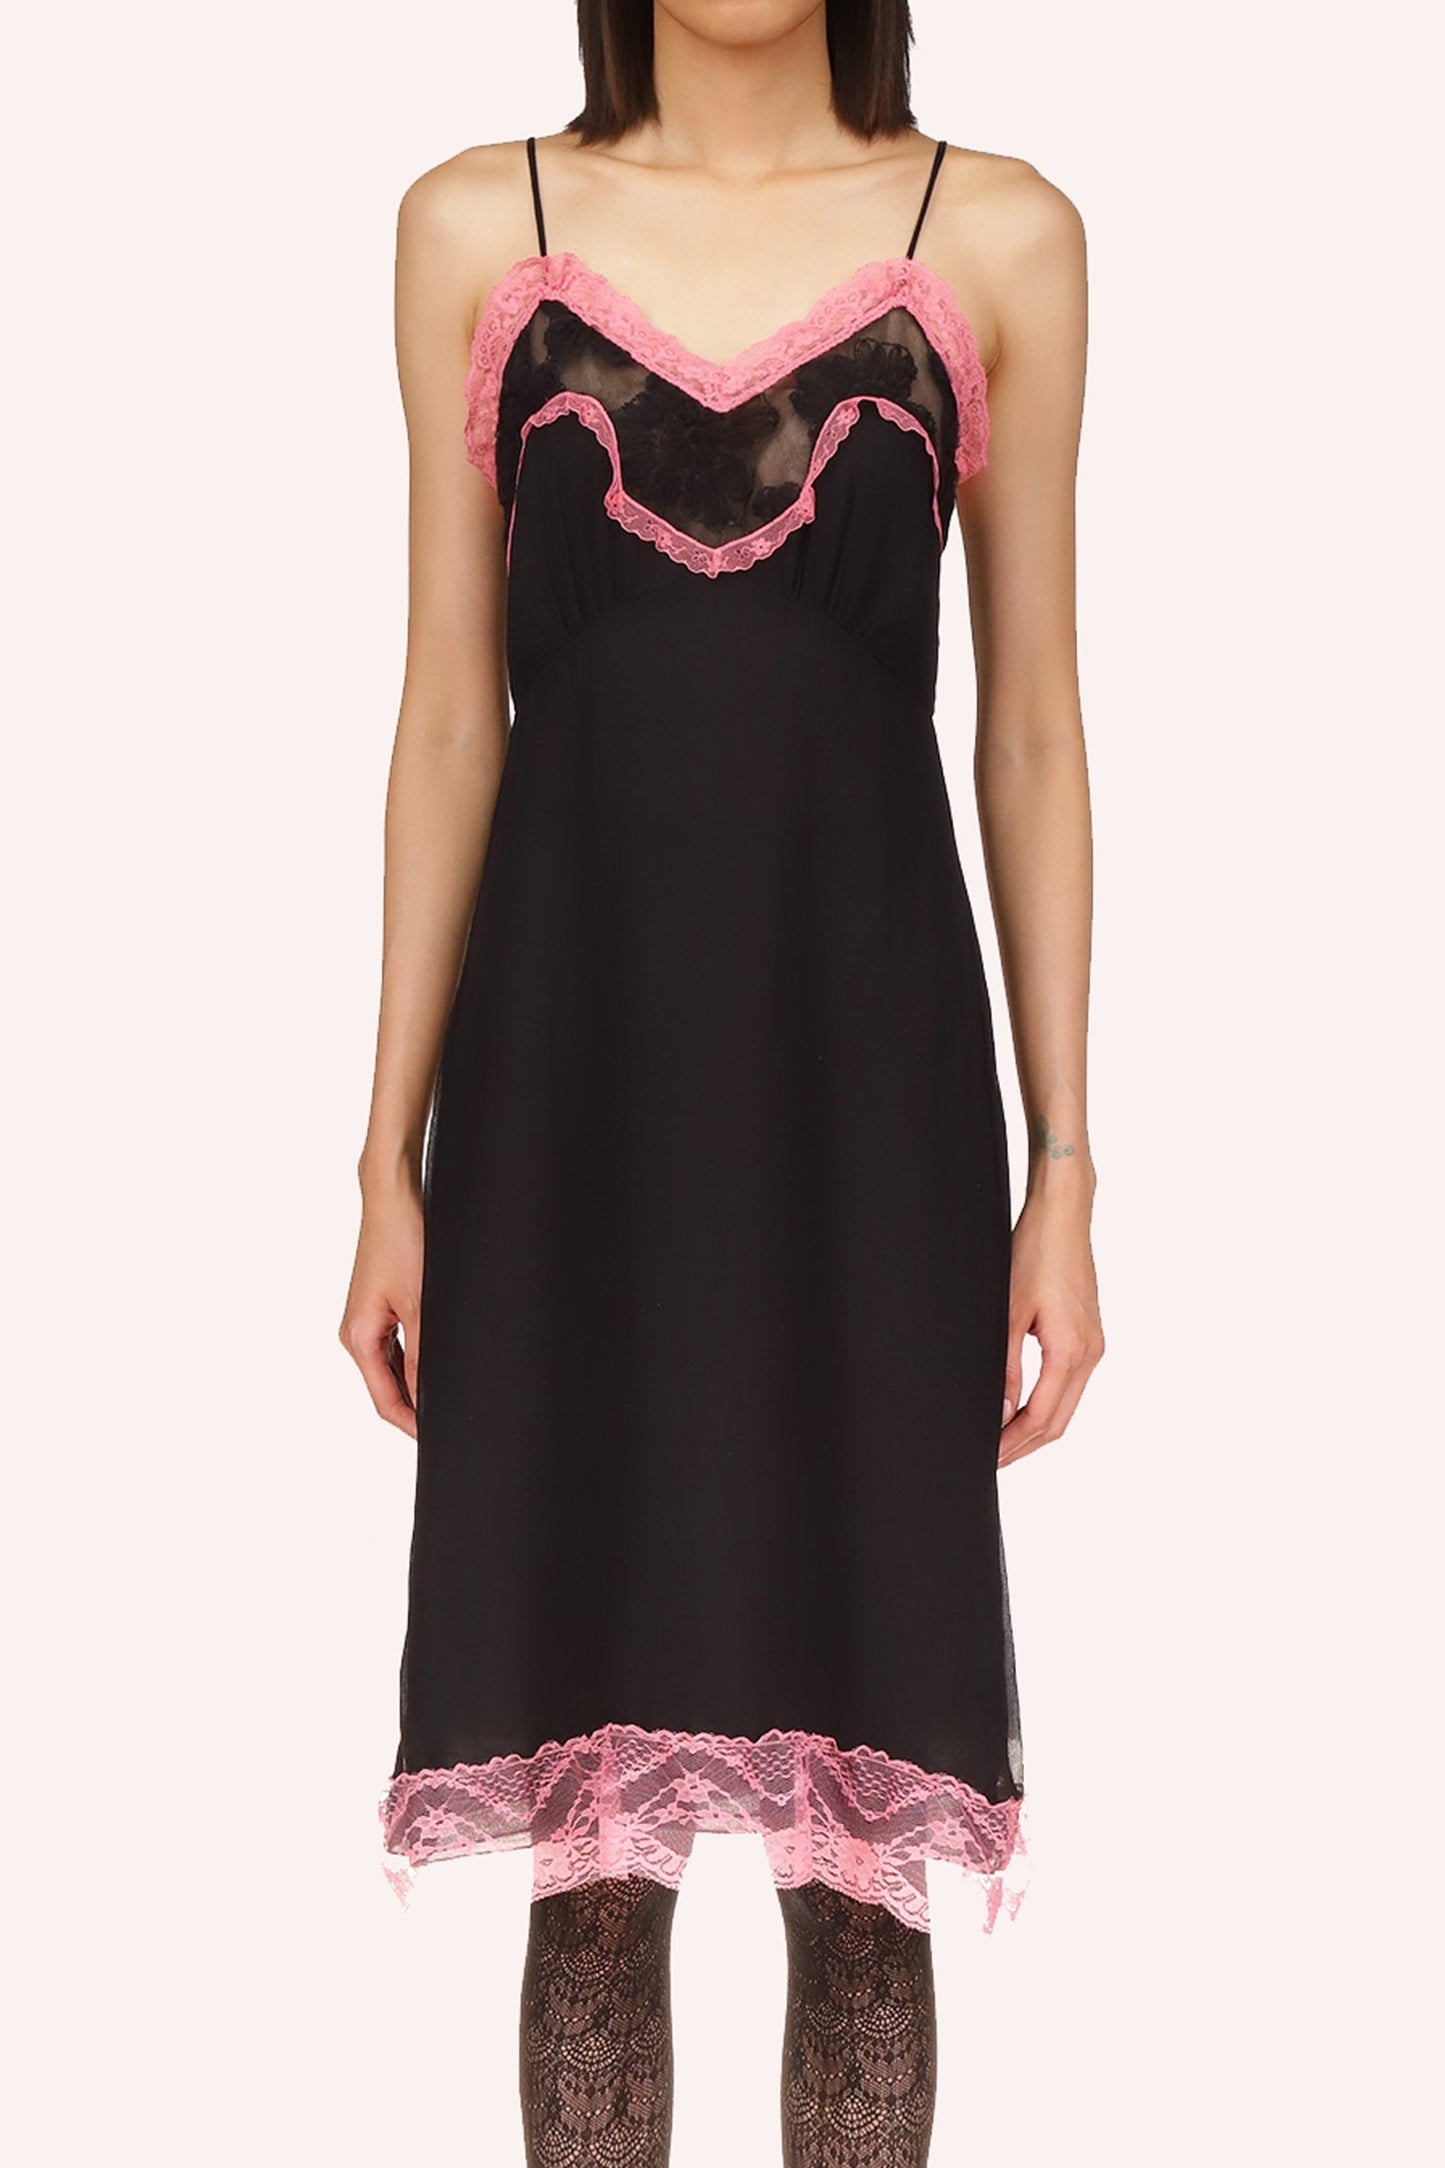 Black dress, a black floral see-through between the pink highlights, sleeveless, 2 straps, knee-long